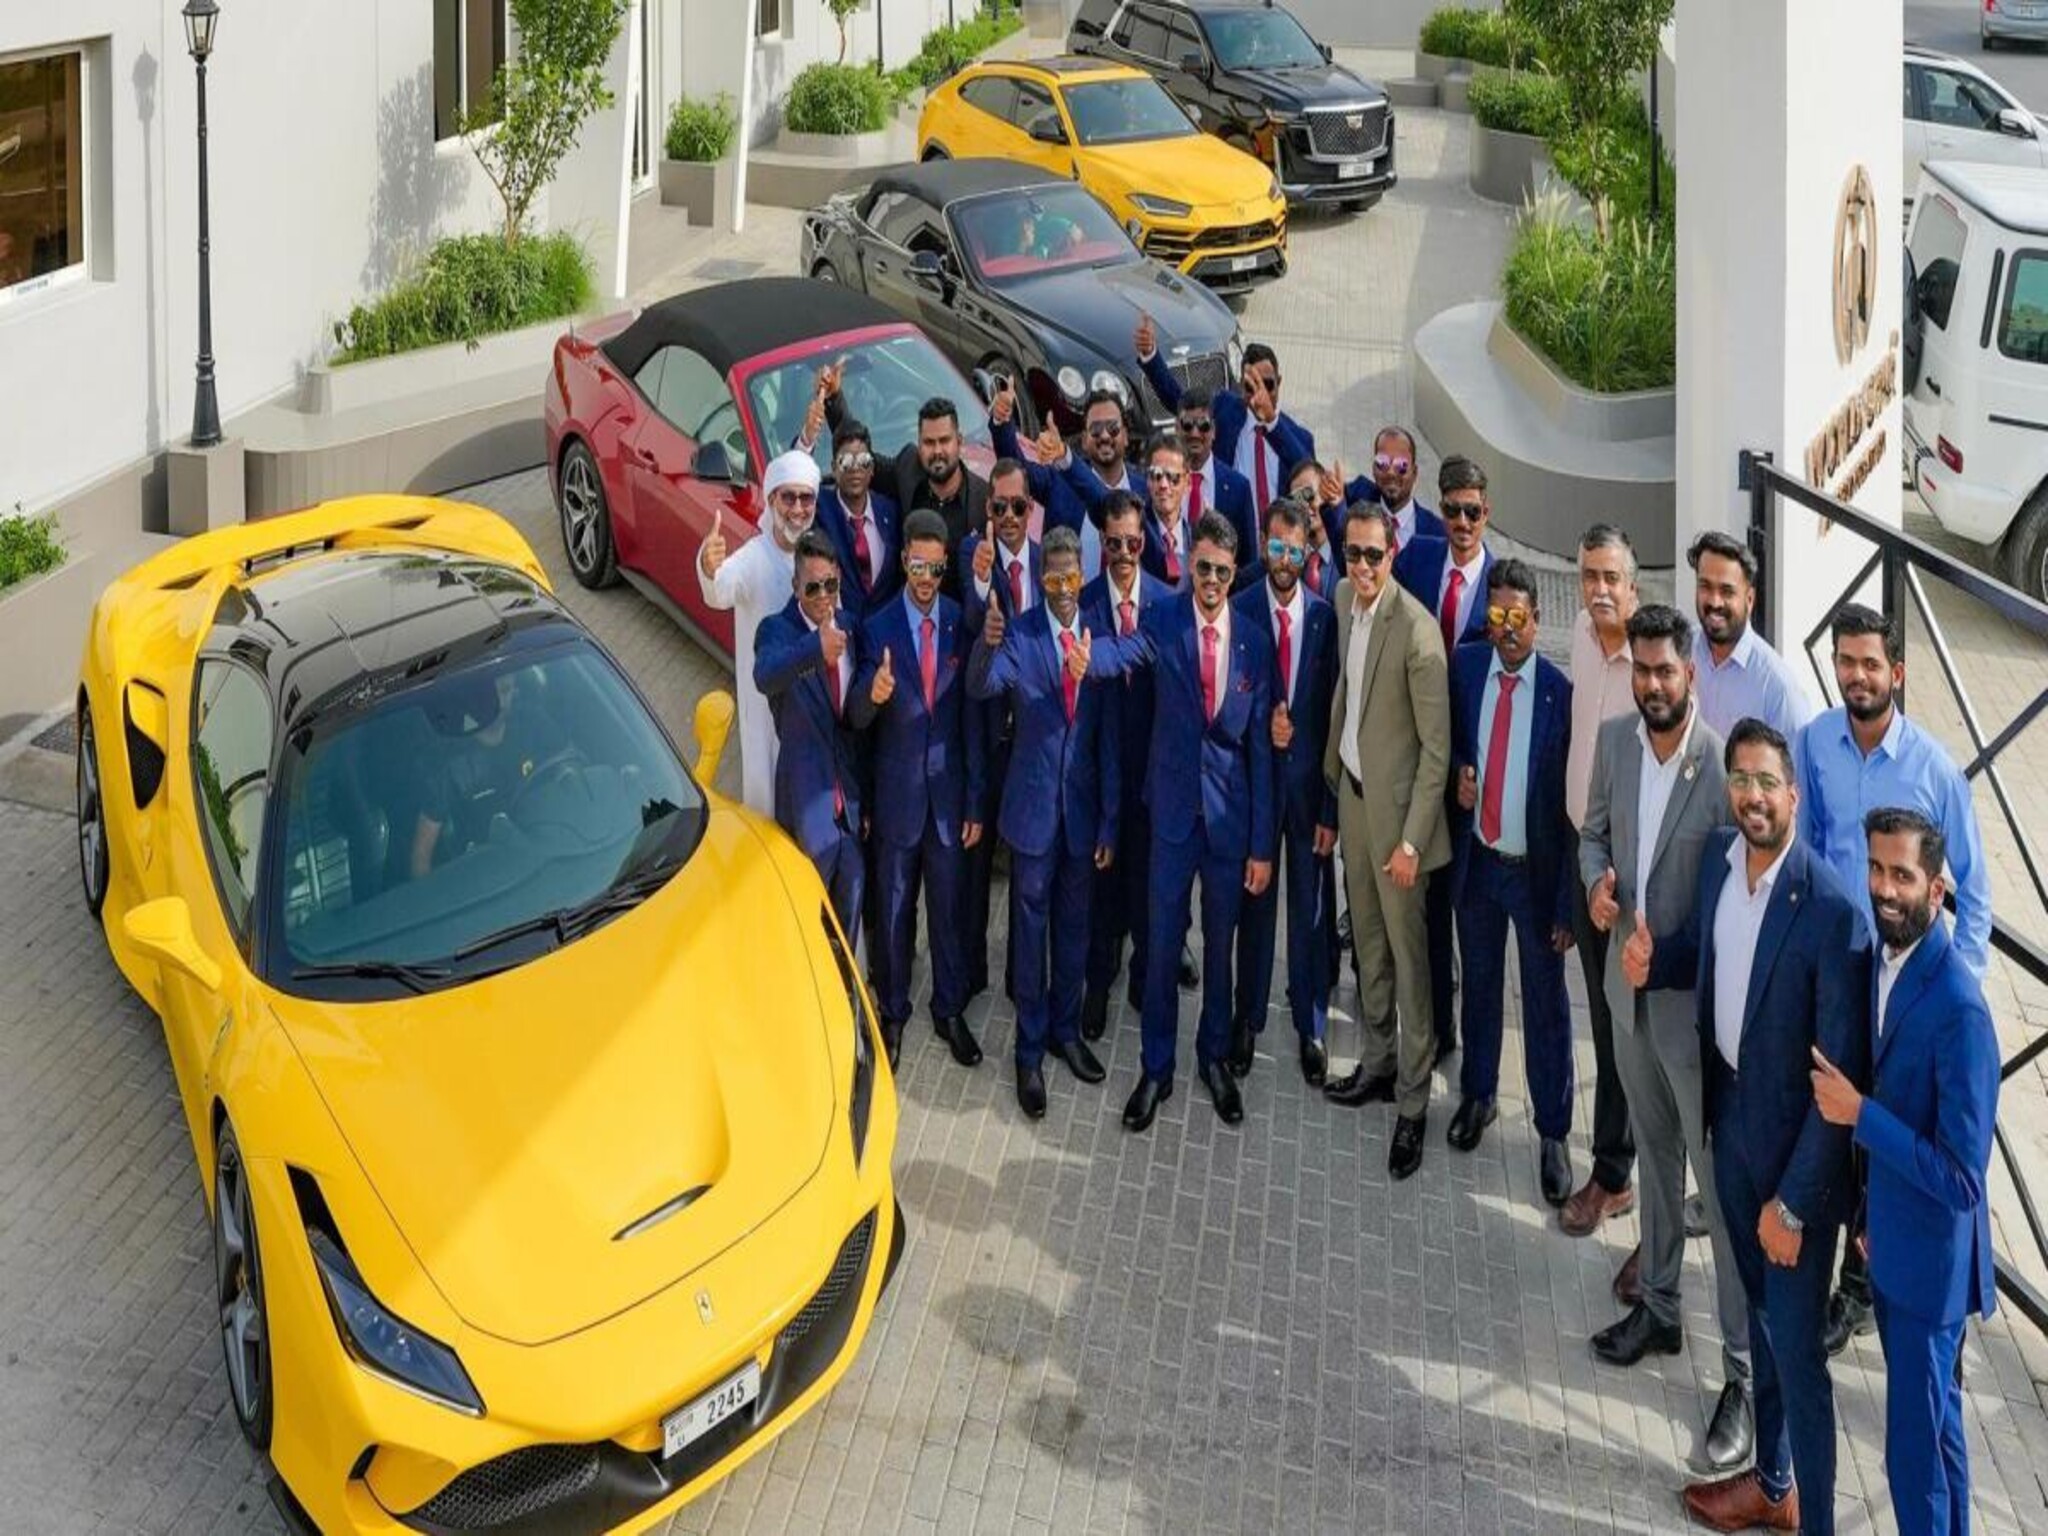 Dubai: A company made 16 of its workers millionaires in their honor